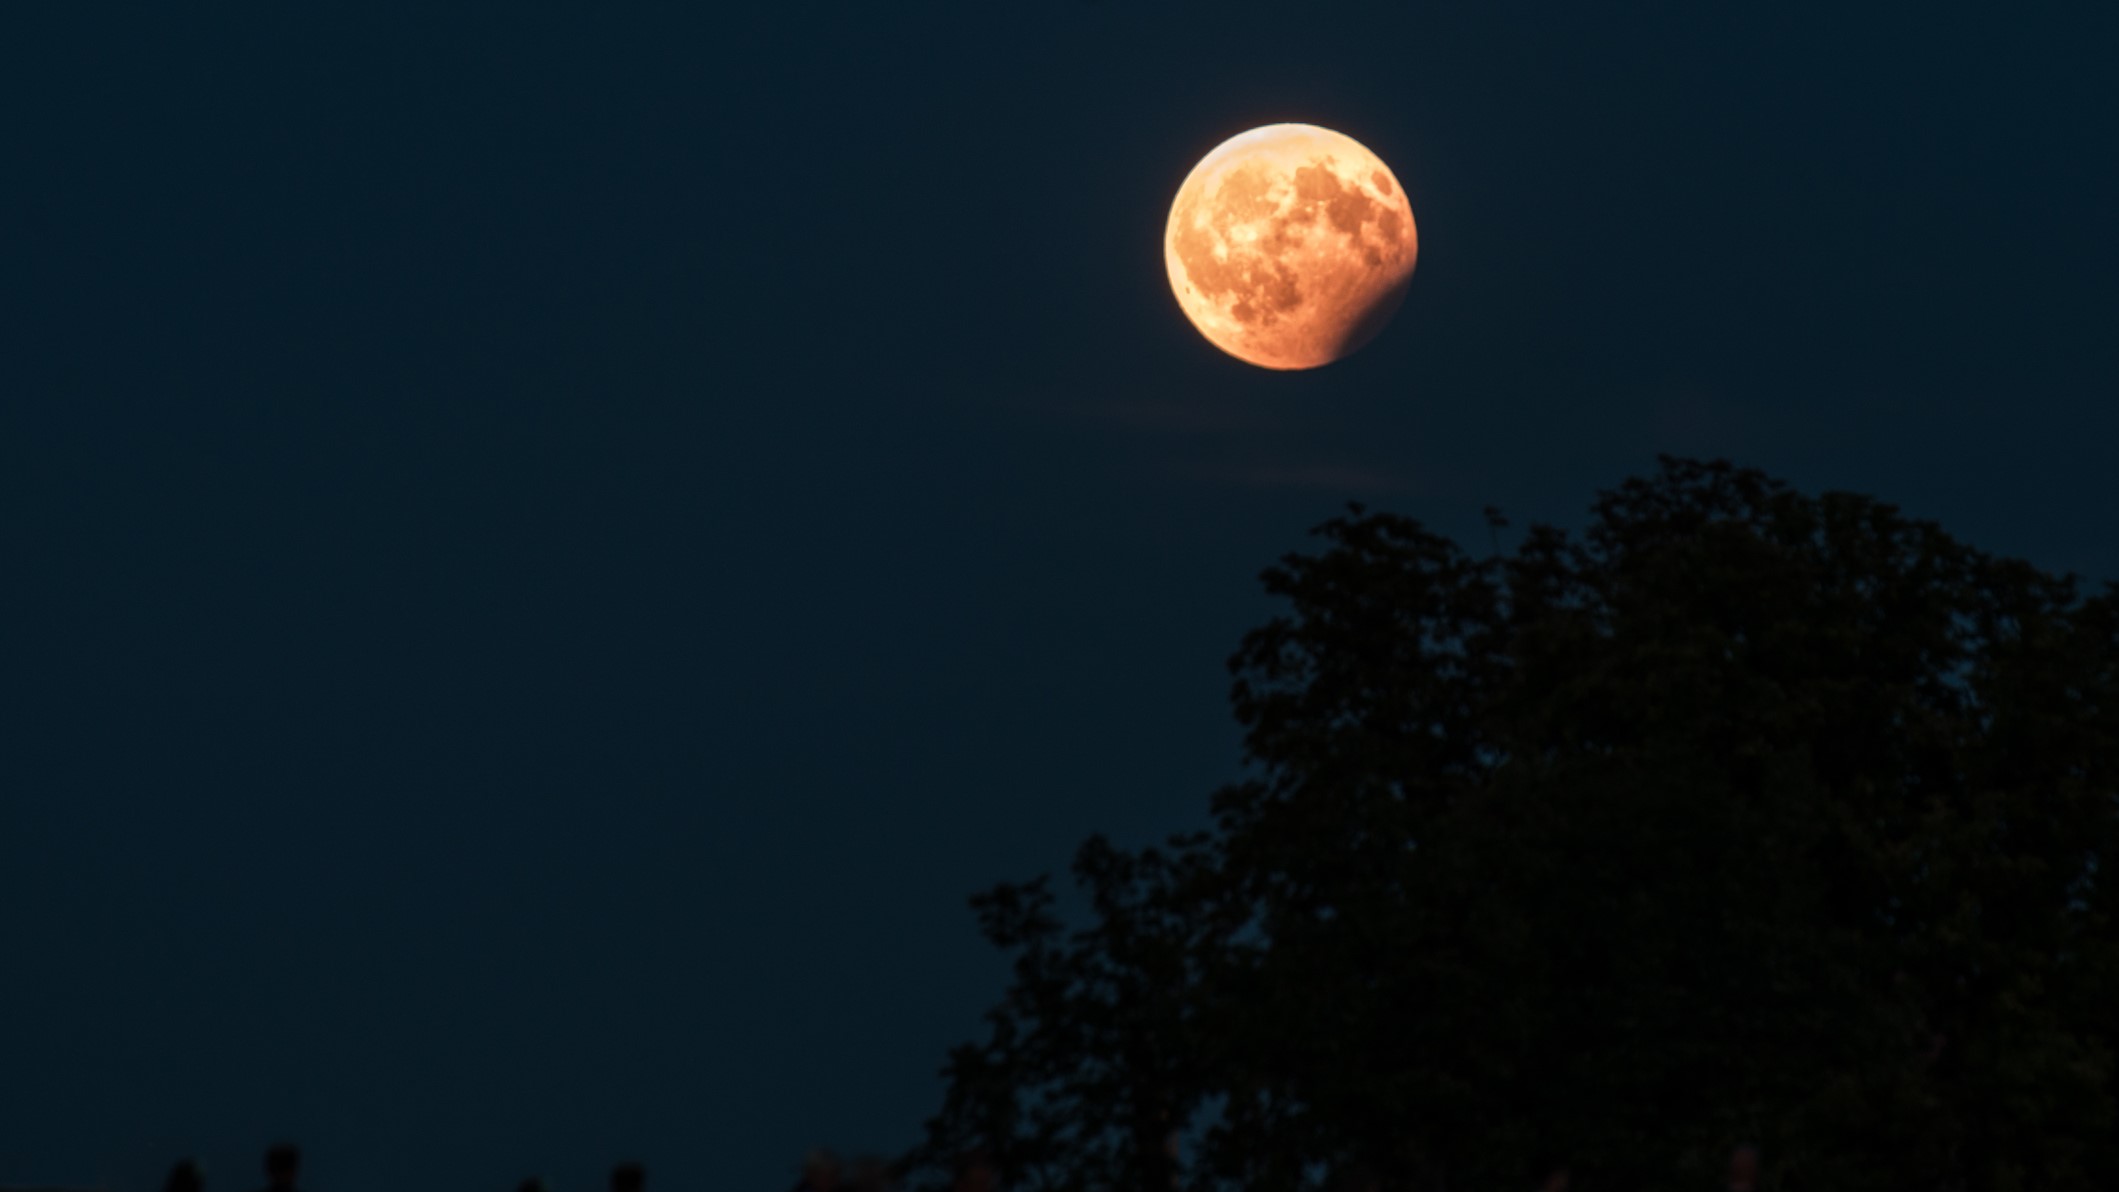 Full Hunter's Moon puts on a spooky display today with partial lunar eclipse